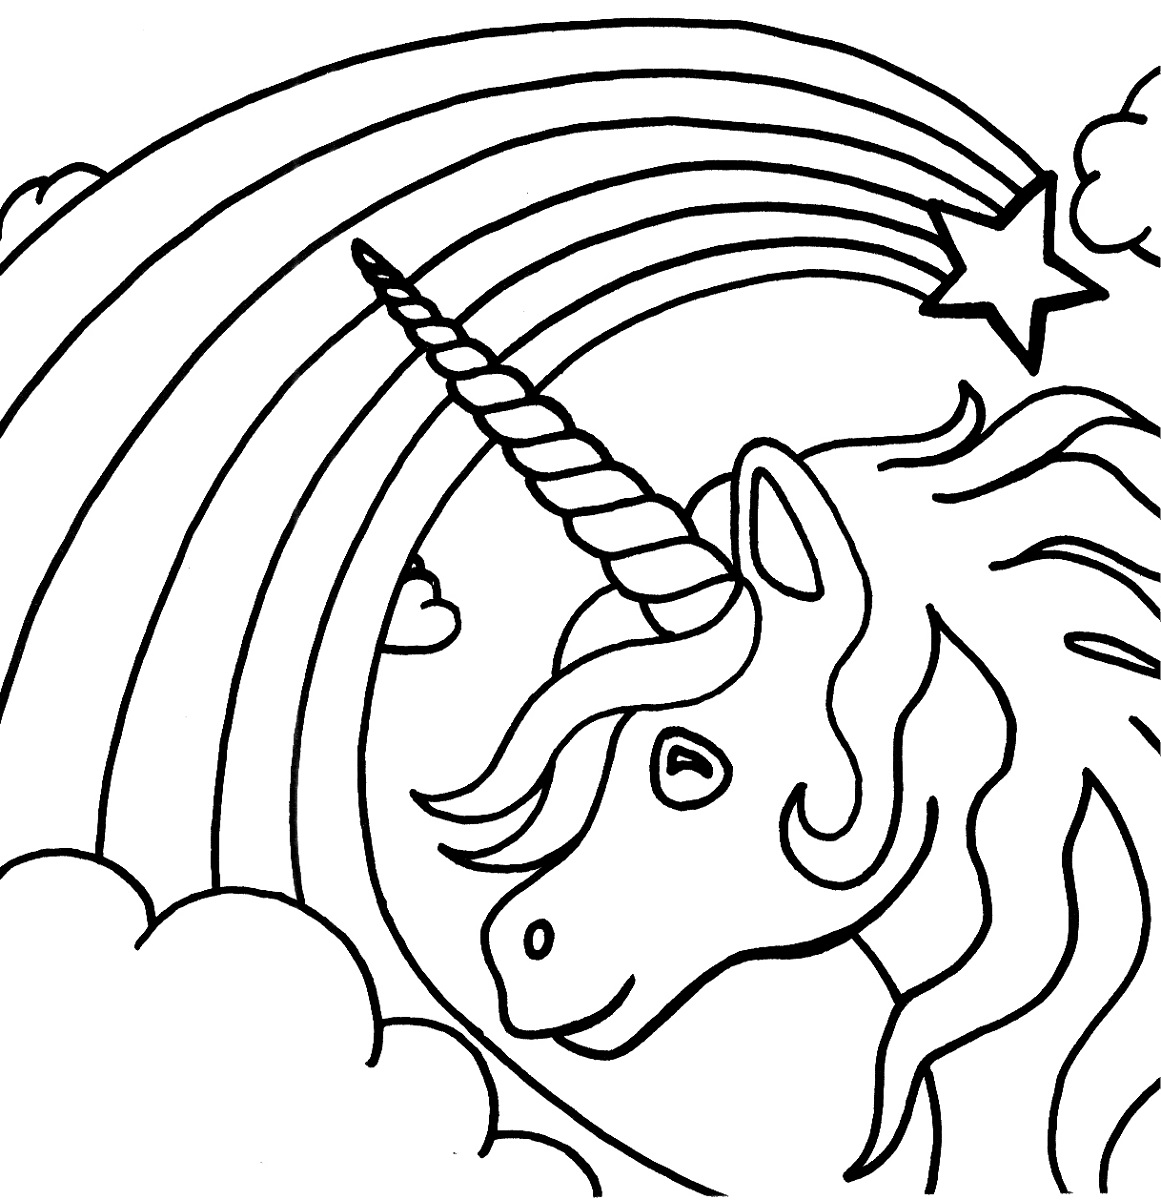 Unicorn Coloring Pages For Kids at GetDrawings | Free download